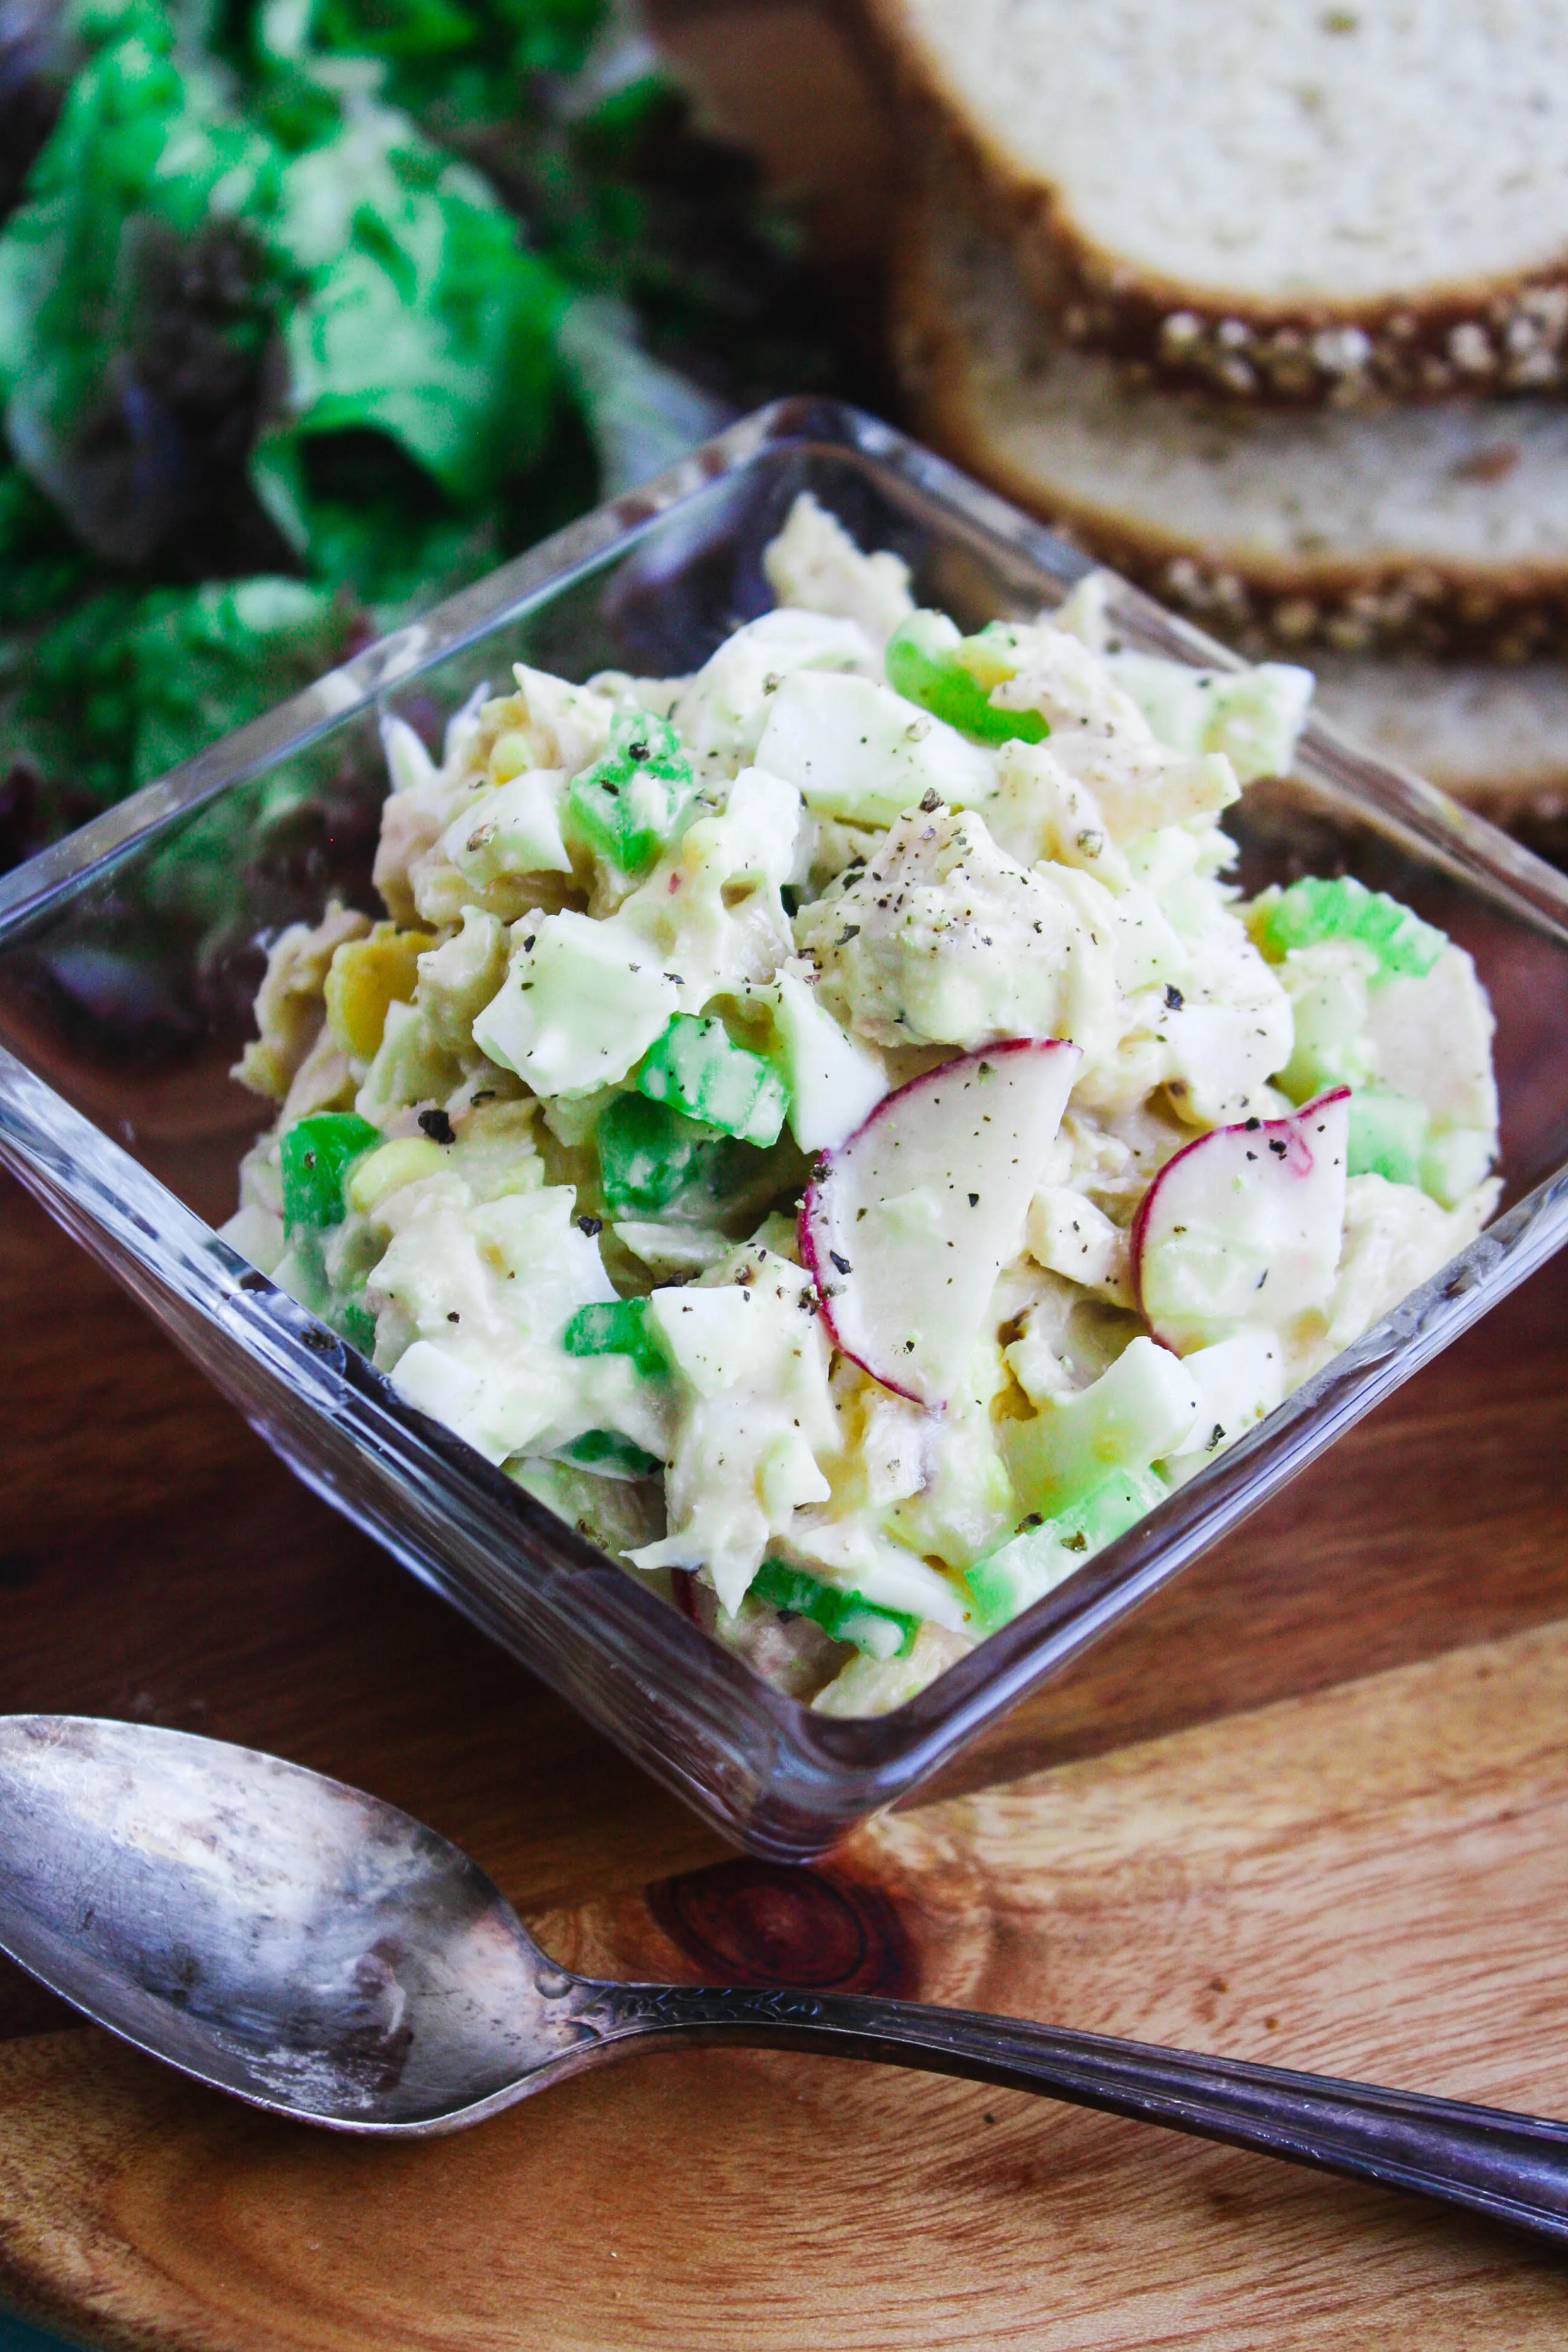 Tuna Salad with Egg makes a great sandwich spread. Tuna Salad with Egg is easy to make and perfect for lunch or dinner!